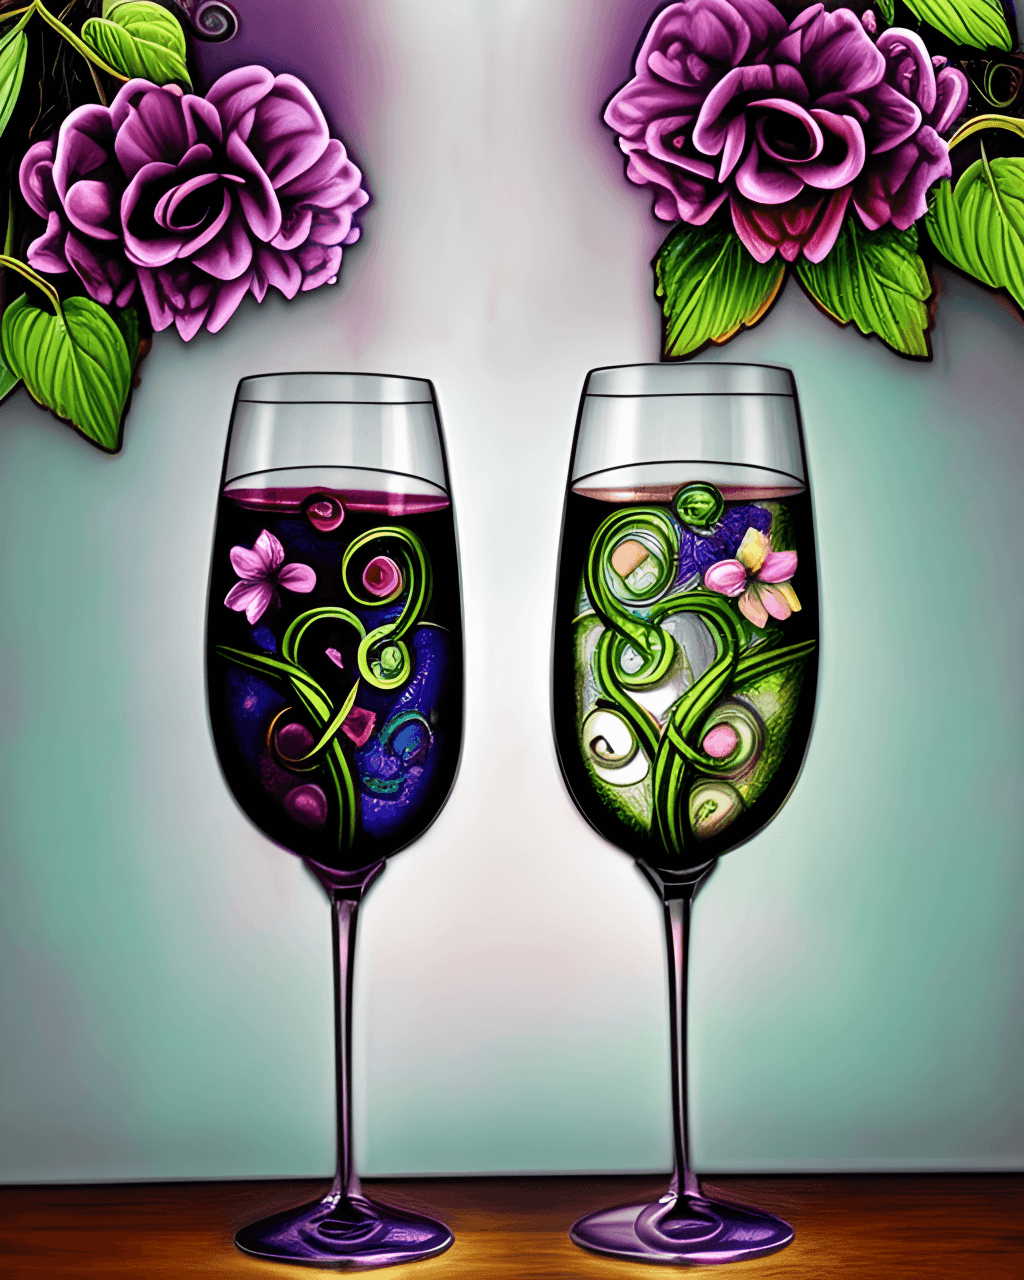 https://www.creativefabrica.com/wp-content/uploads/2023/02/11/Beautiful-Pastel-Floral-Vine-Wrapped-Around-Two-Wine-Glasses-60864811-1.png